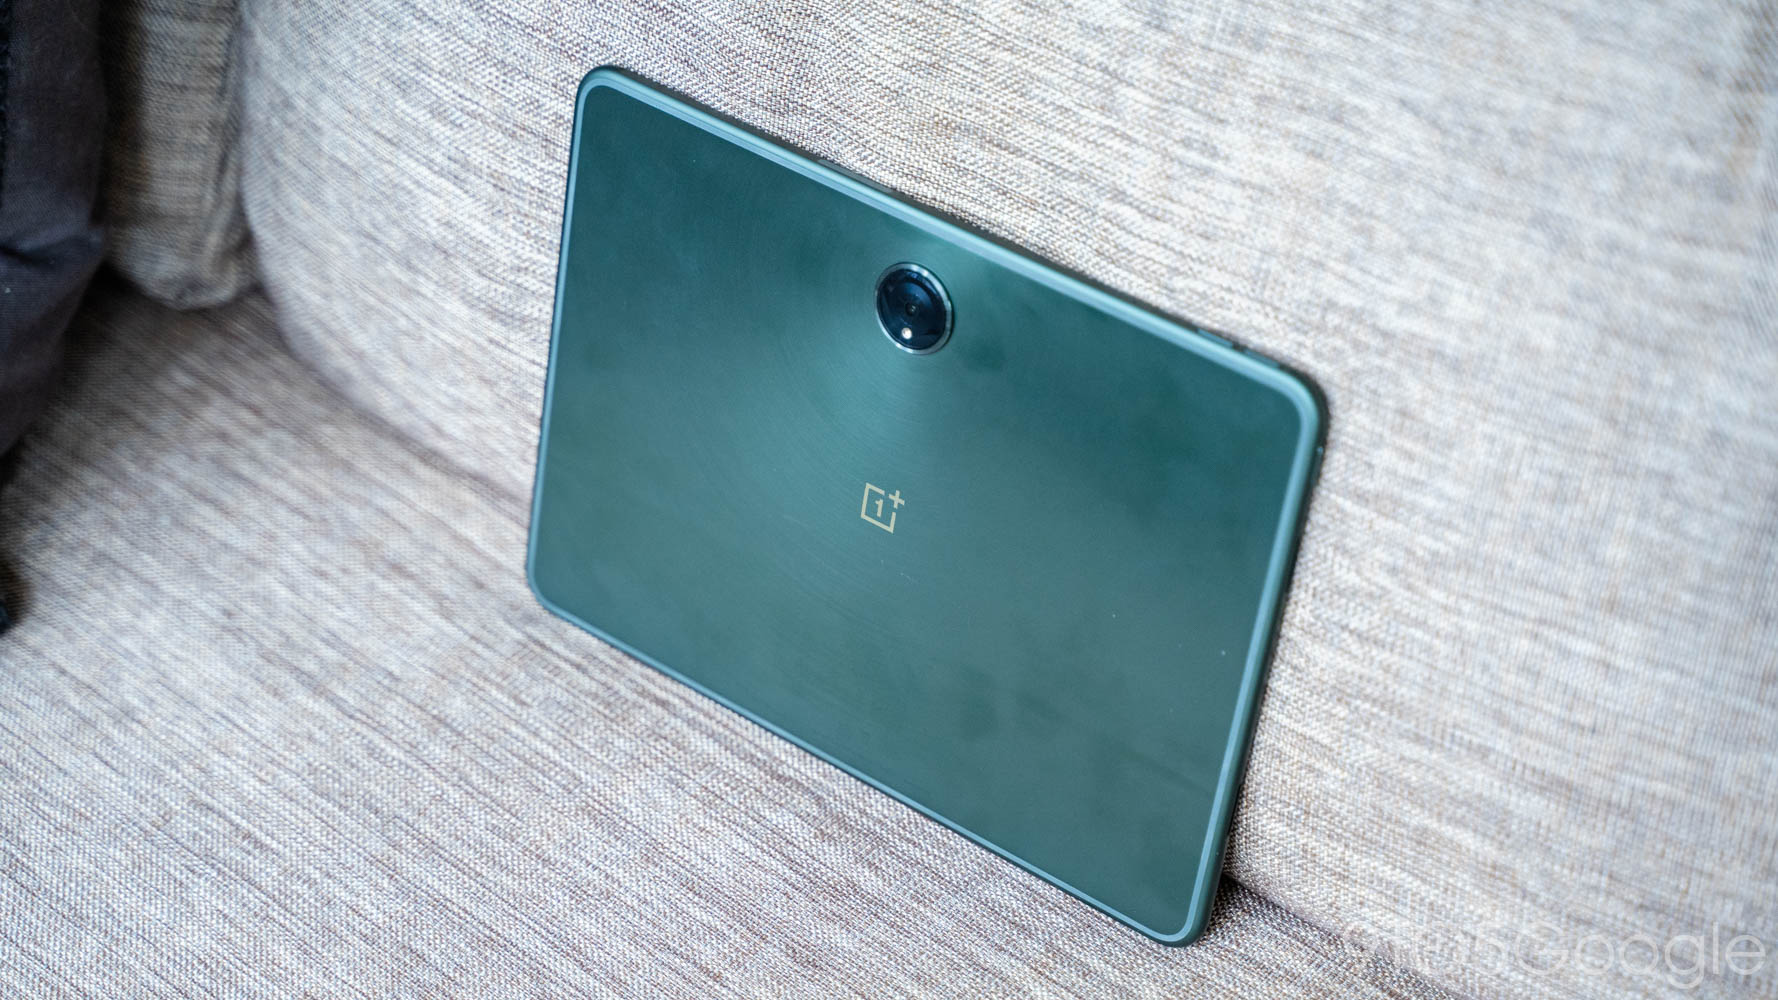 OnePlus enters the tablet game with the OnePlus Pad 